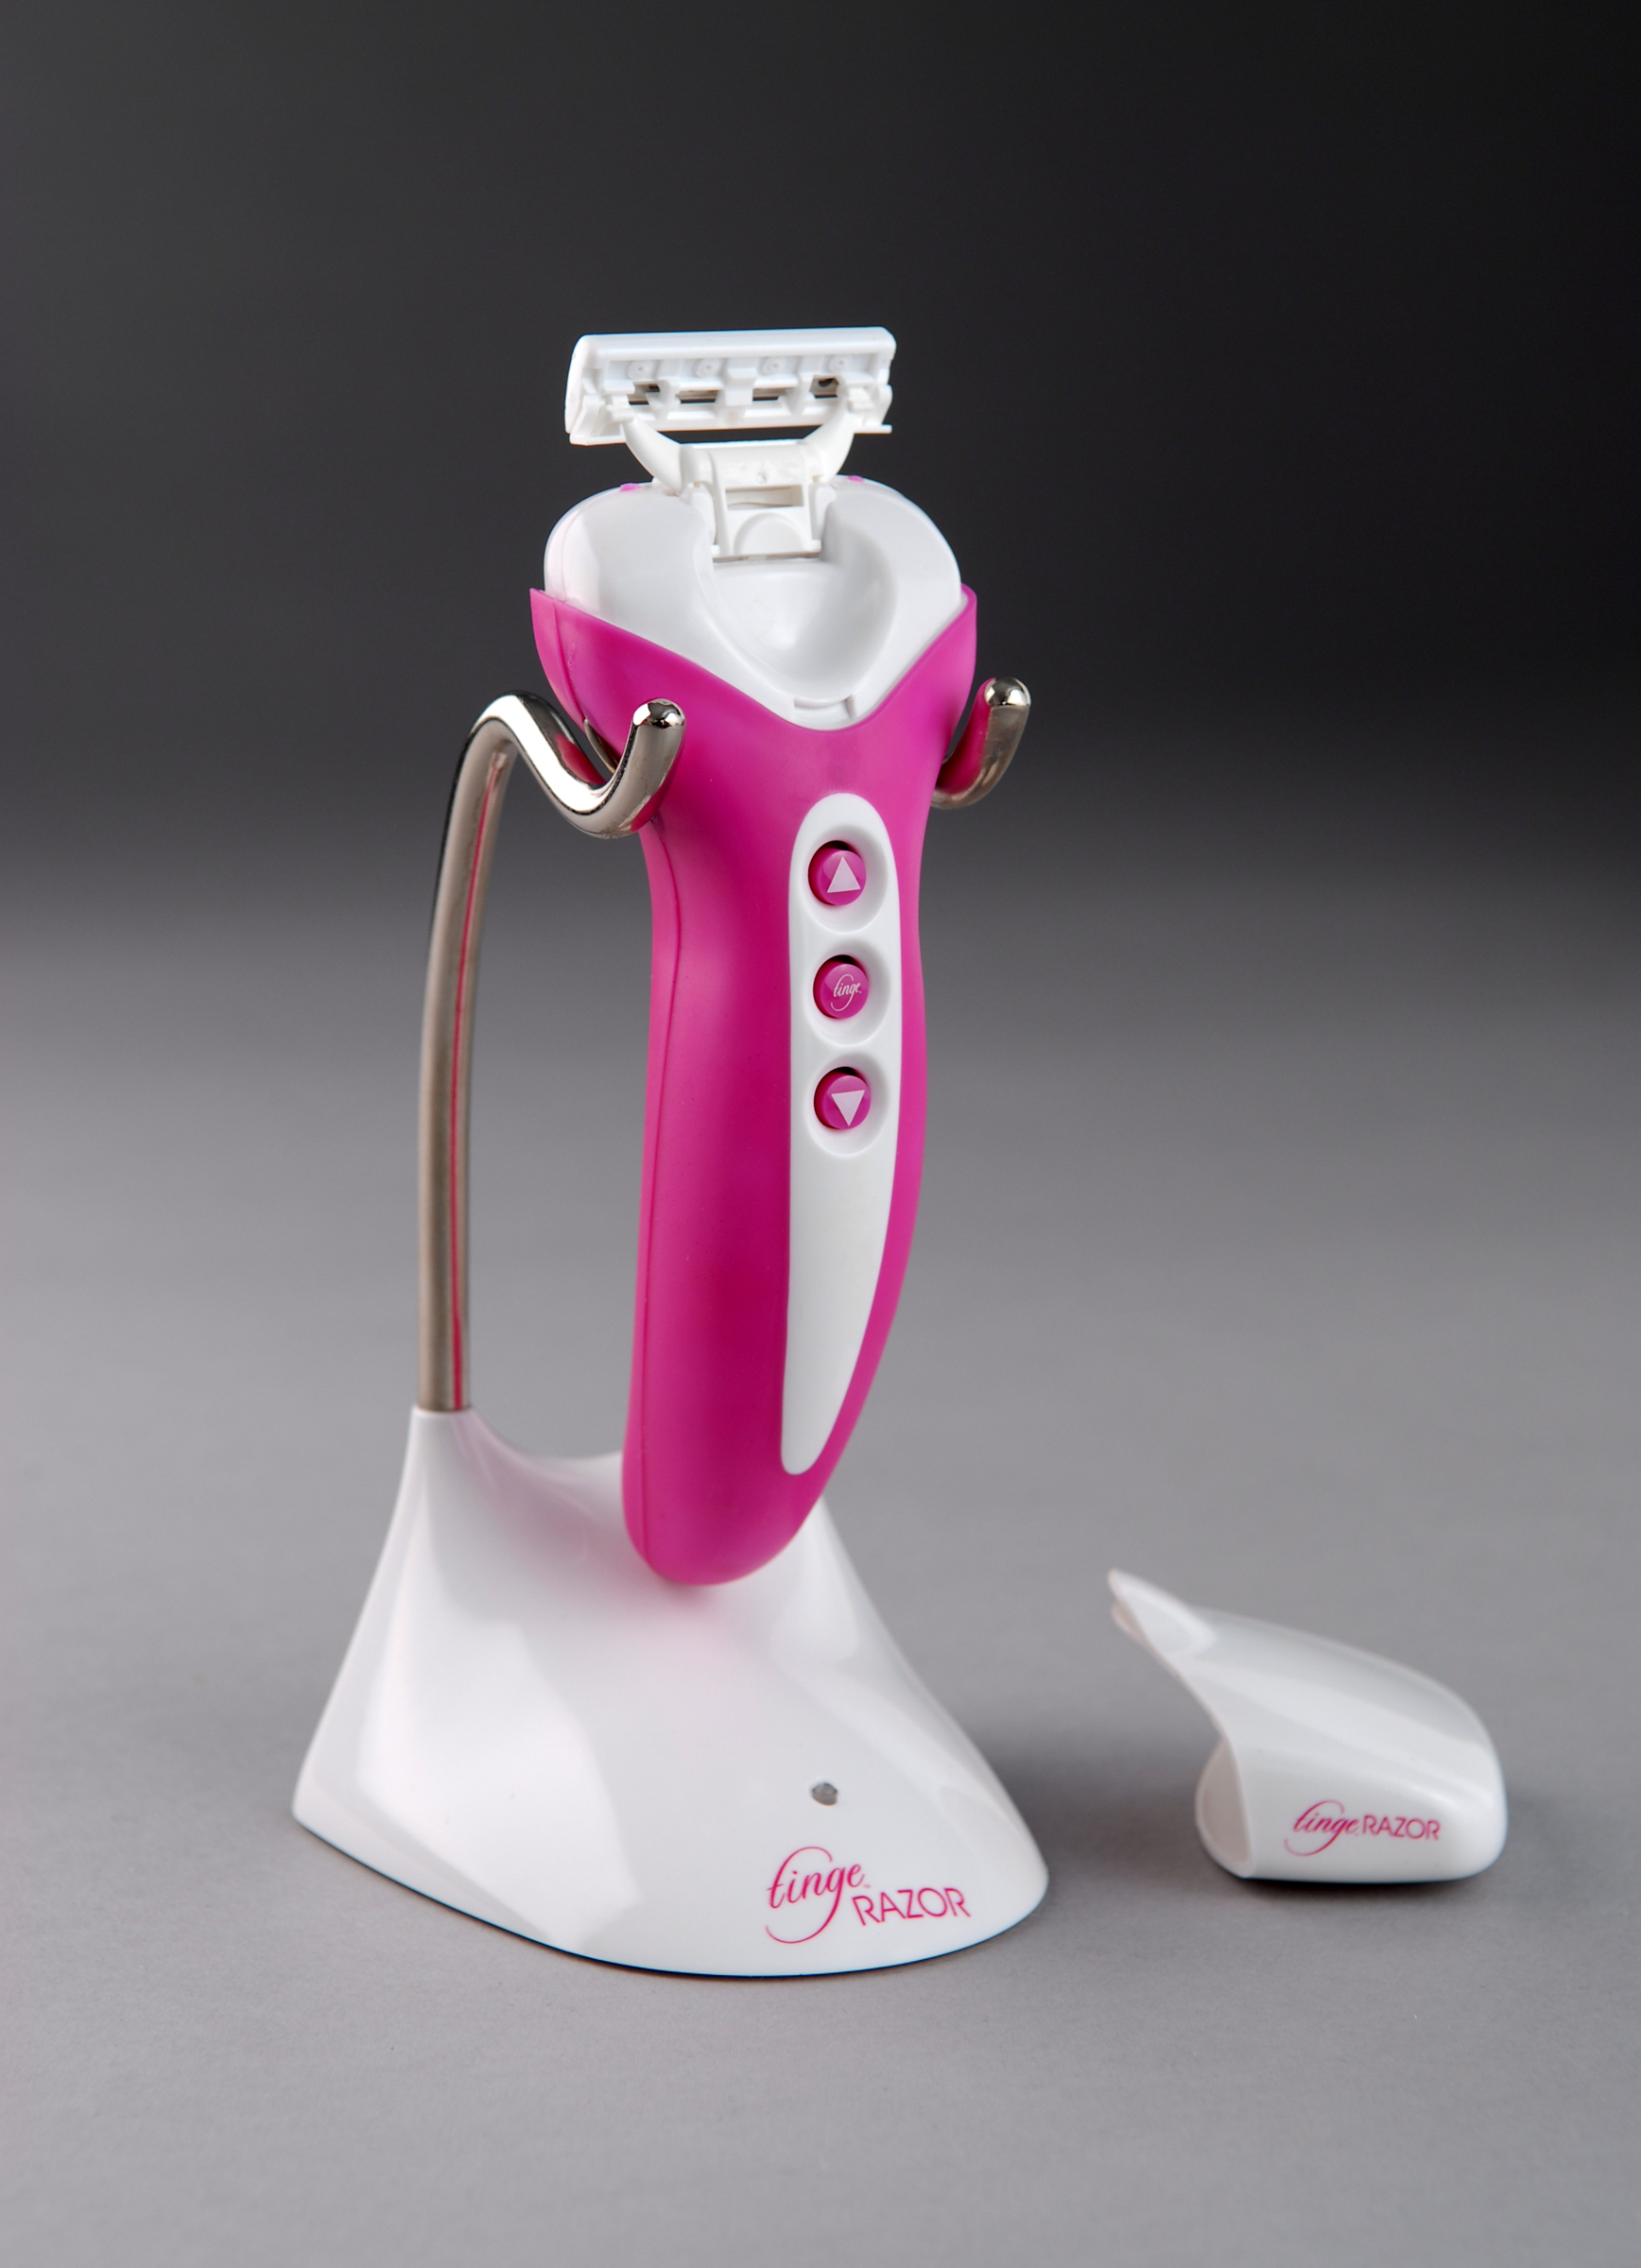 Tinge® Offers Discreet Luxury Vibrator Disguised as a Razor - Woman